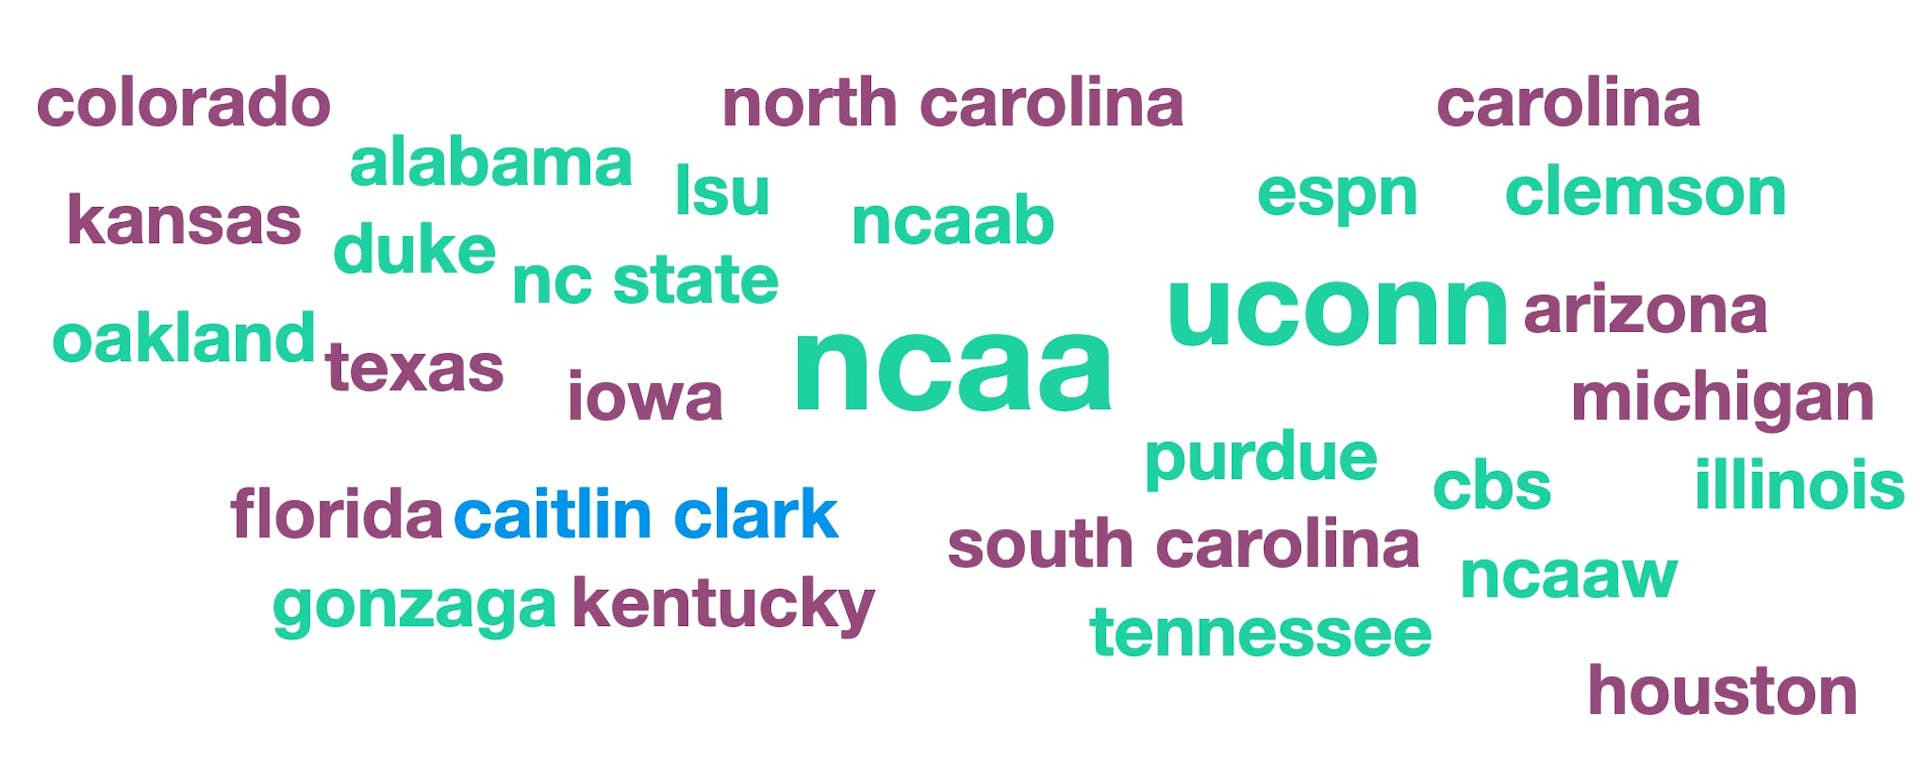 A word cloud showing the top entities of March Madness 2024, with NCAA being the largest.